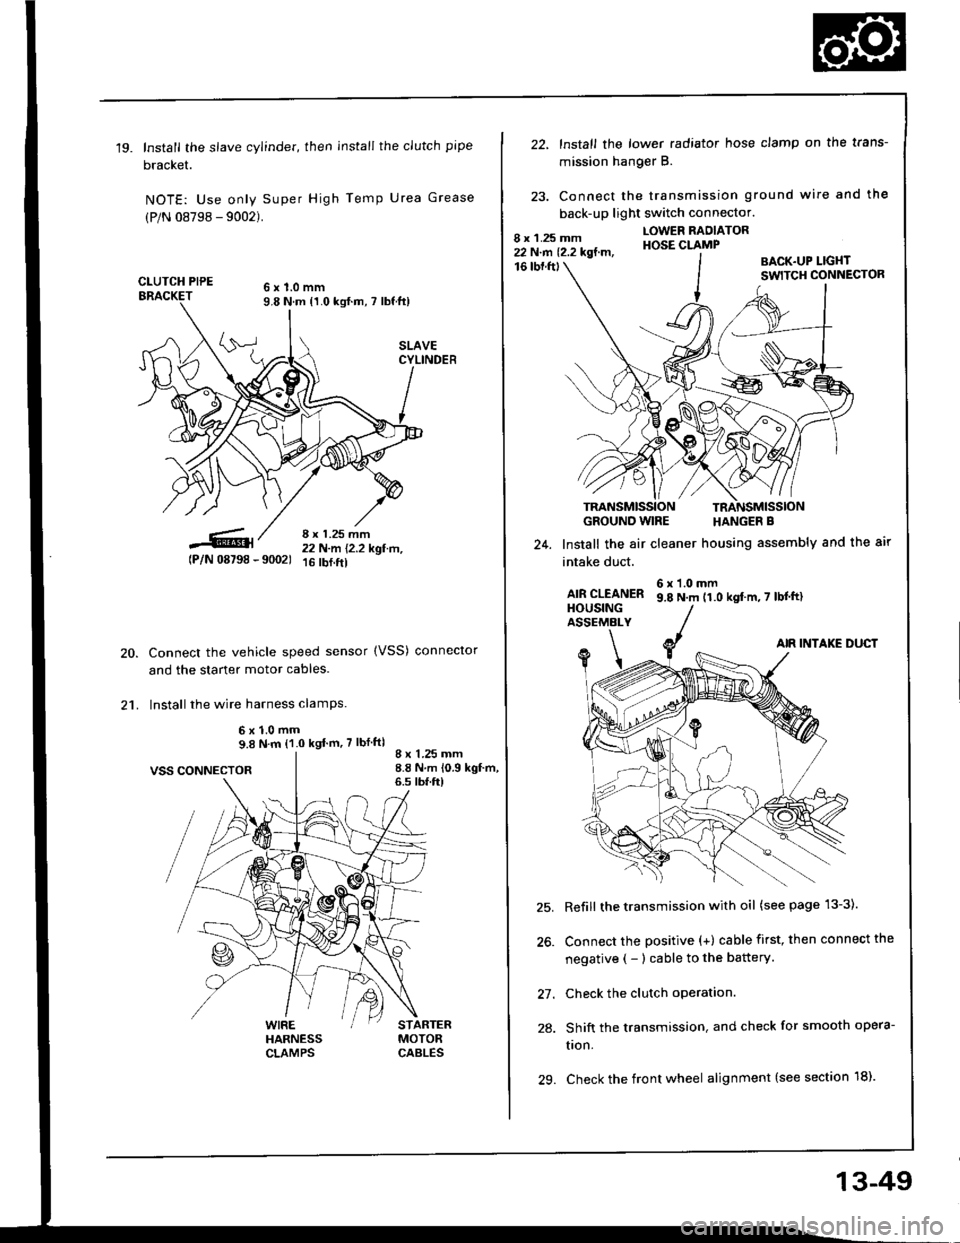 HONDA INTEGRA 1994 4.G Owners Manual 19.Install the slave cylinder, then install the clutch pipe
bracket.
NOTE: Use only Super High Temp Urea Grease
(P/N 08798 - 9002).
CLUTCH PIPE6x1.0mm9.8 N.m {1.0 kgf.m, 7 lbf ft)
8 x 1.25 mm22 N-m 1